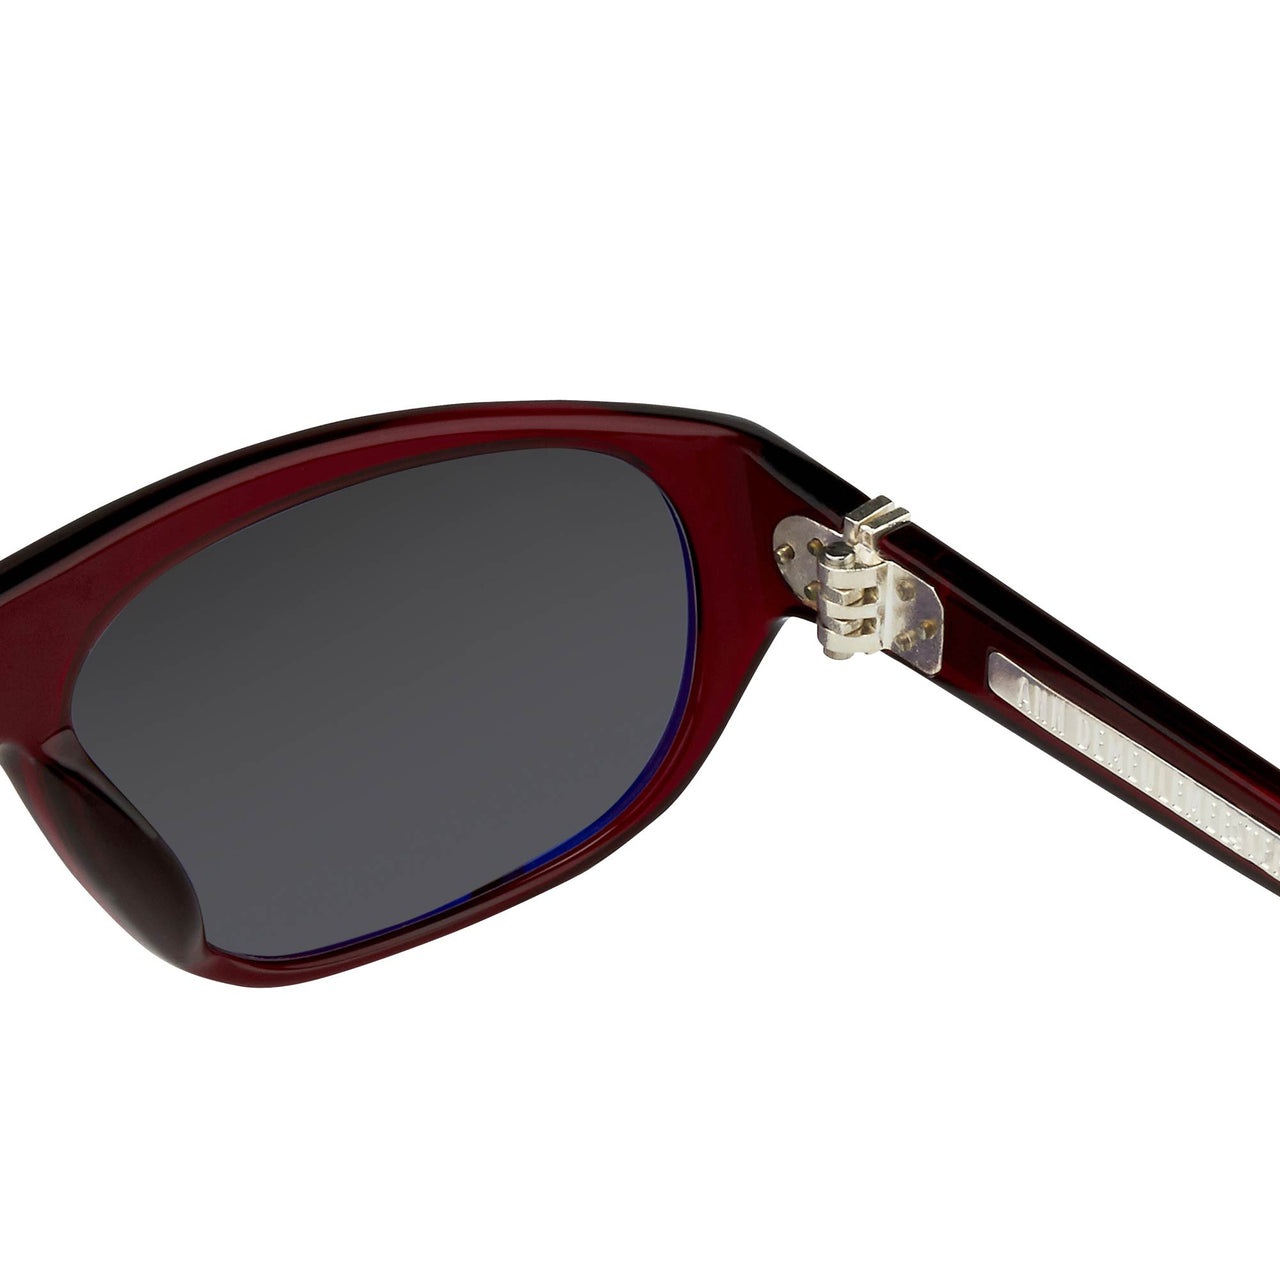 Ann Demeulemeester Sunglasses Bordeaux Red 925 Silver with Blue Lenses AD1C3SUN - Watches & Crystals